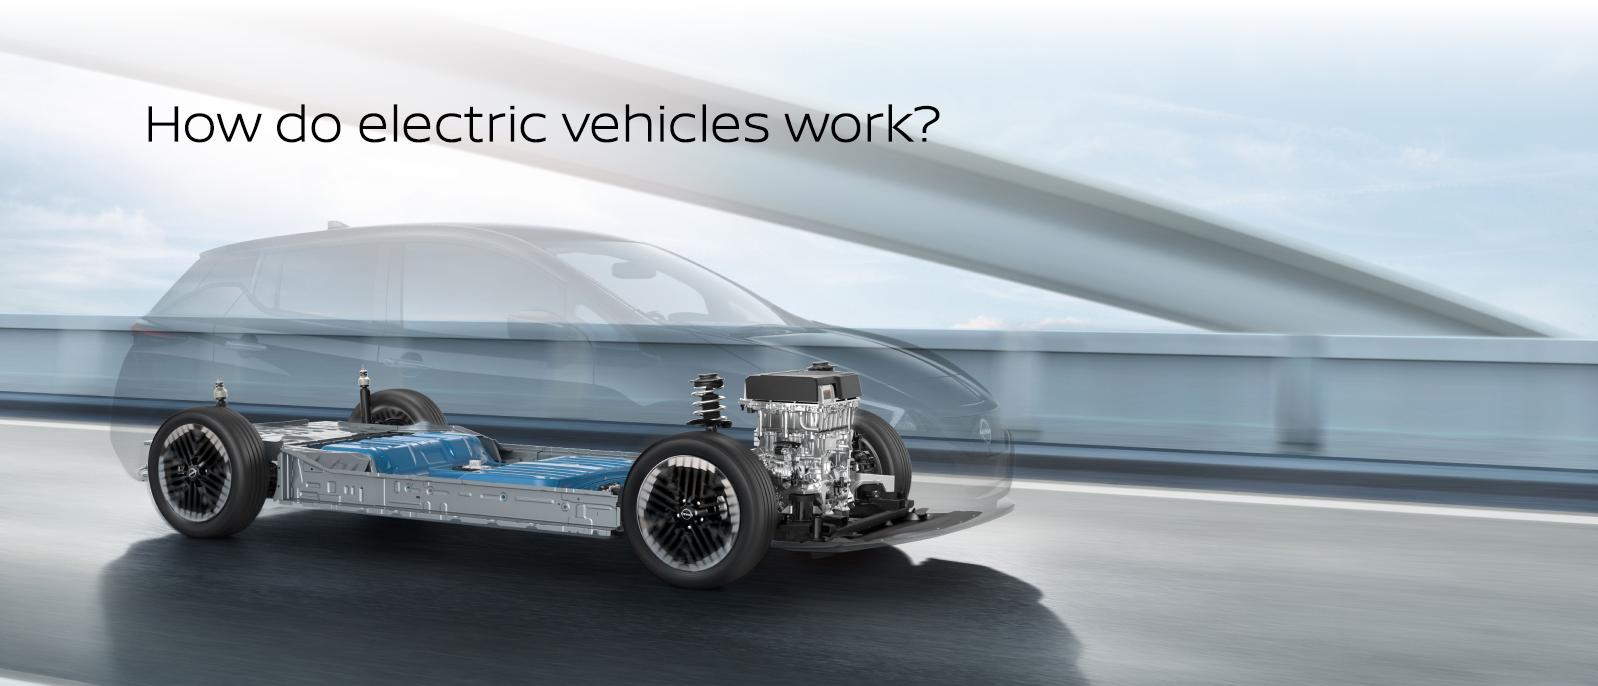 How do electric vehicles work?